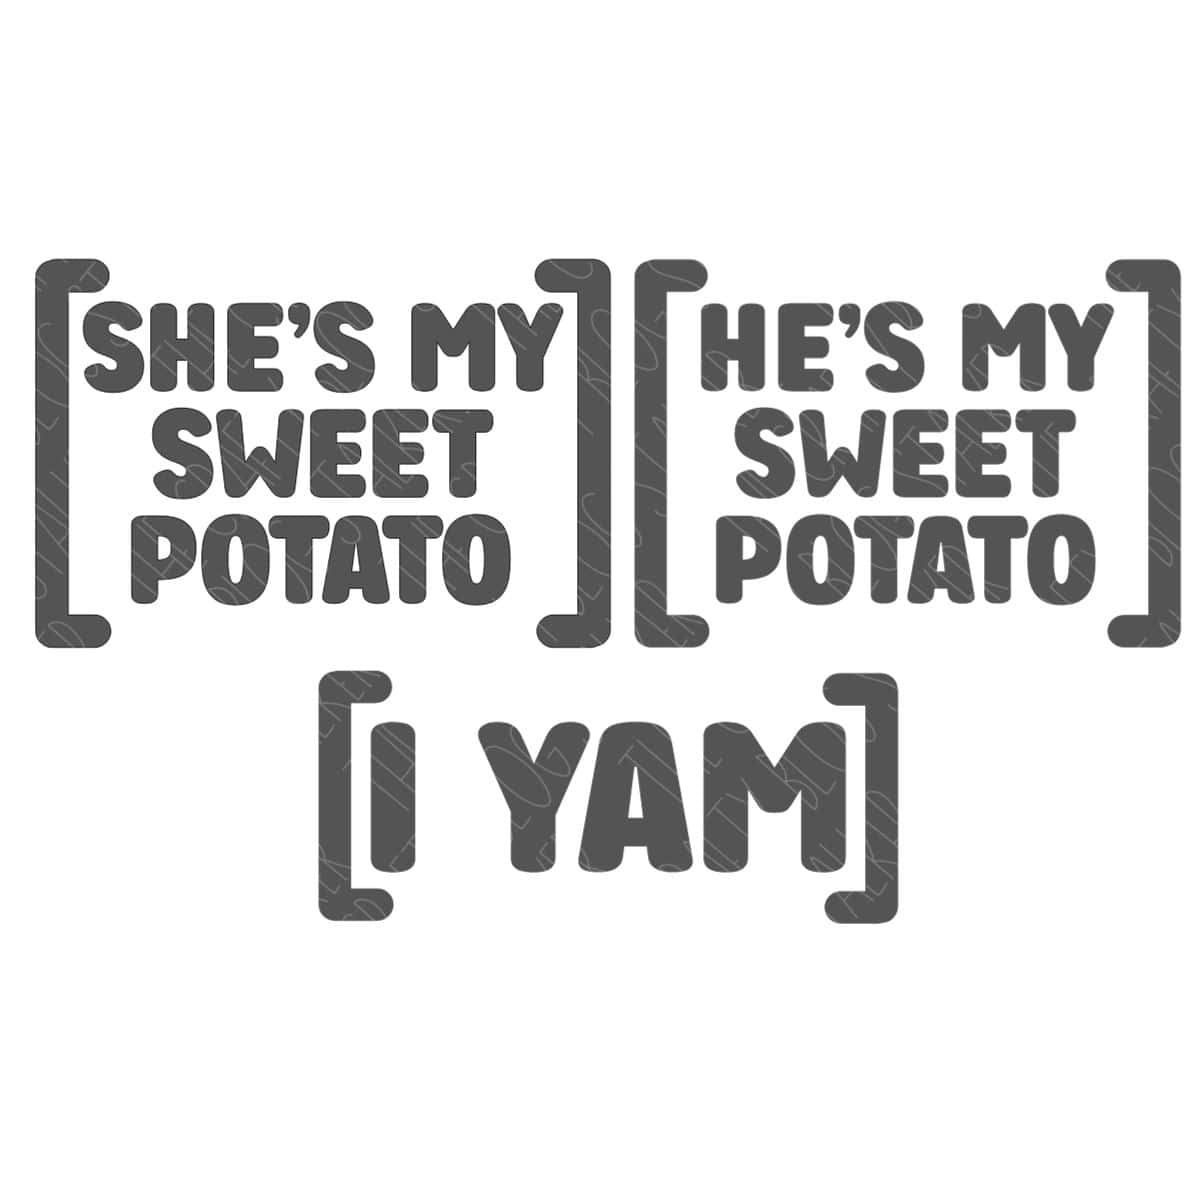 She's My Sweet Potato - I Yam SVG	

			
		
	

		
			$3.00 – Buy Now Checkout
							
					
						
							
						
						Added to cart